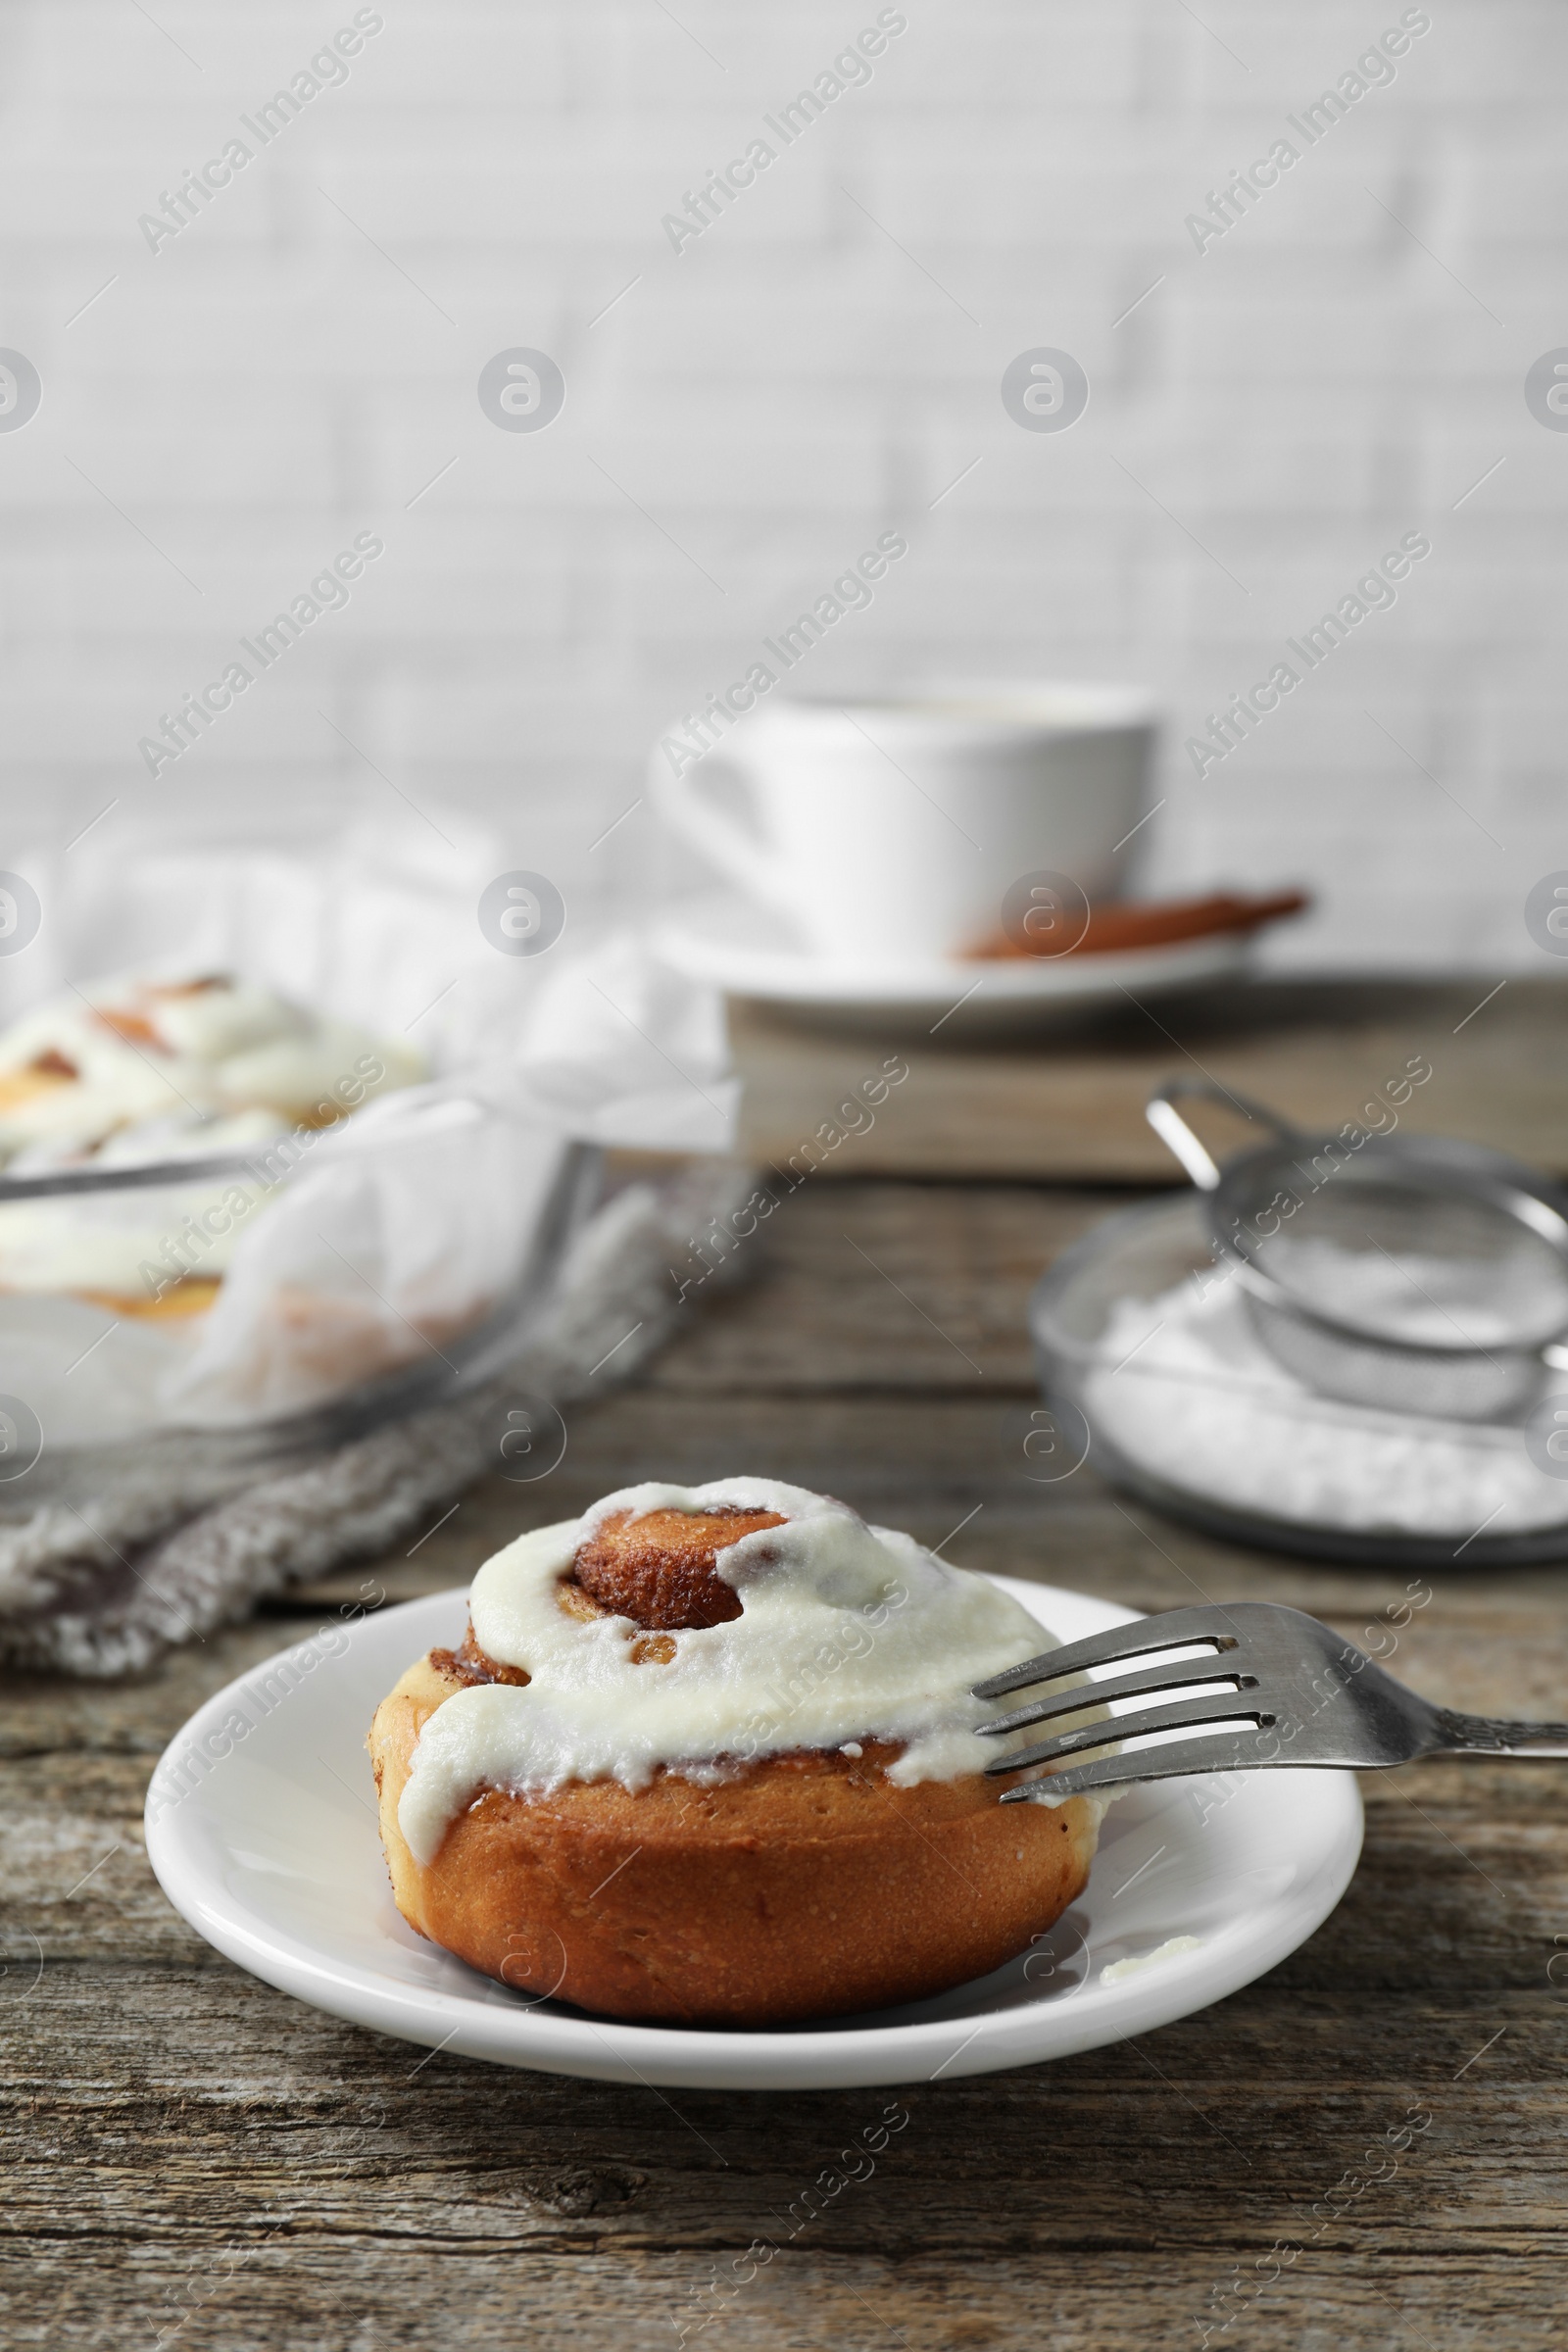 Photo of Tasty cinnamon roll with cream on wooden table. Space for text